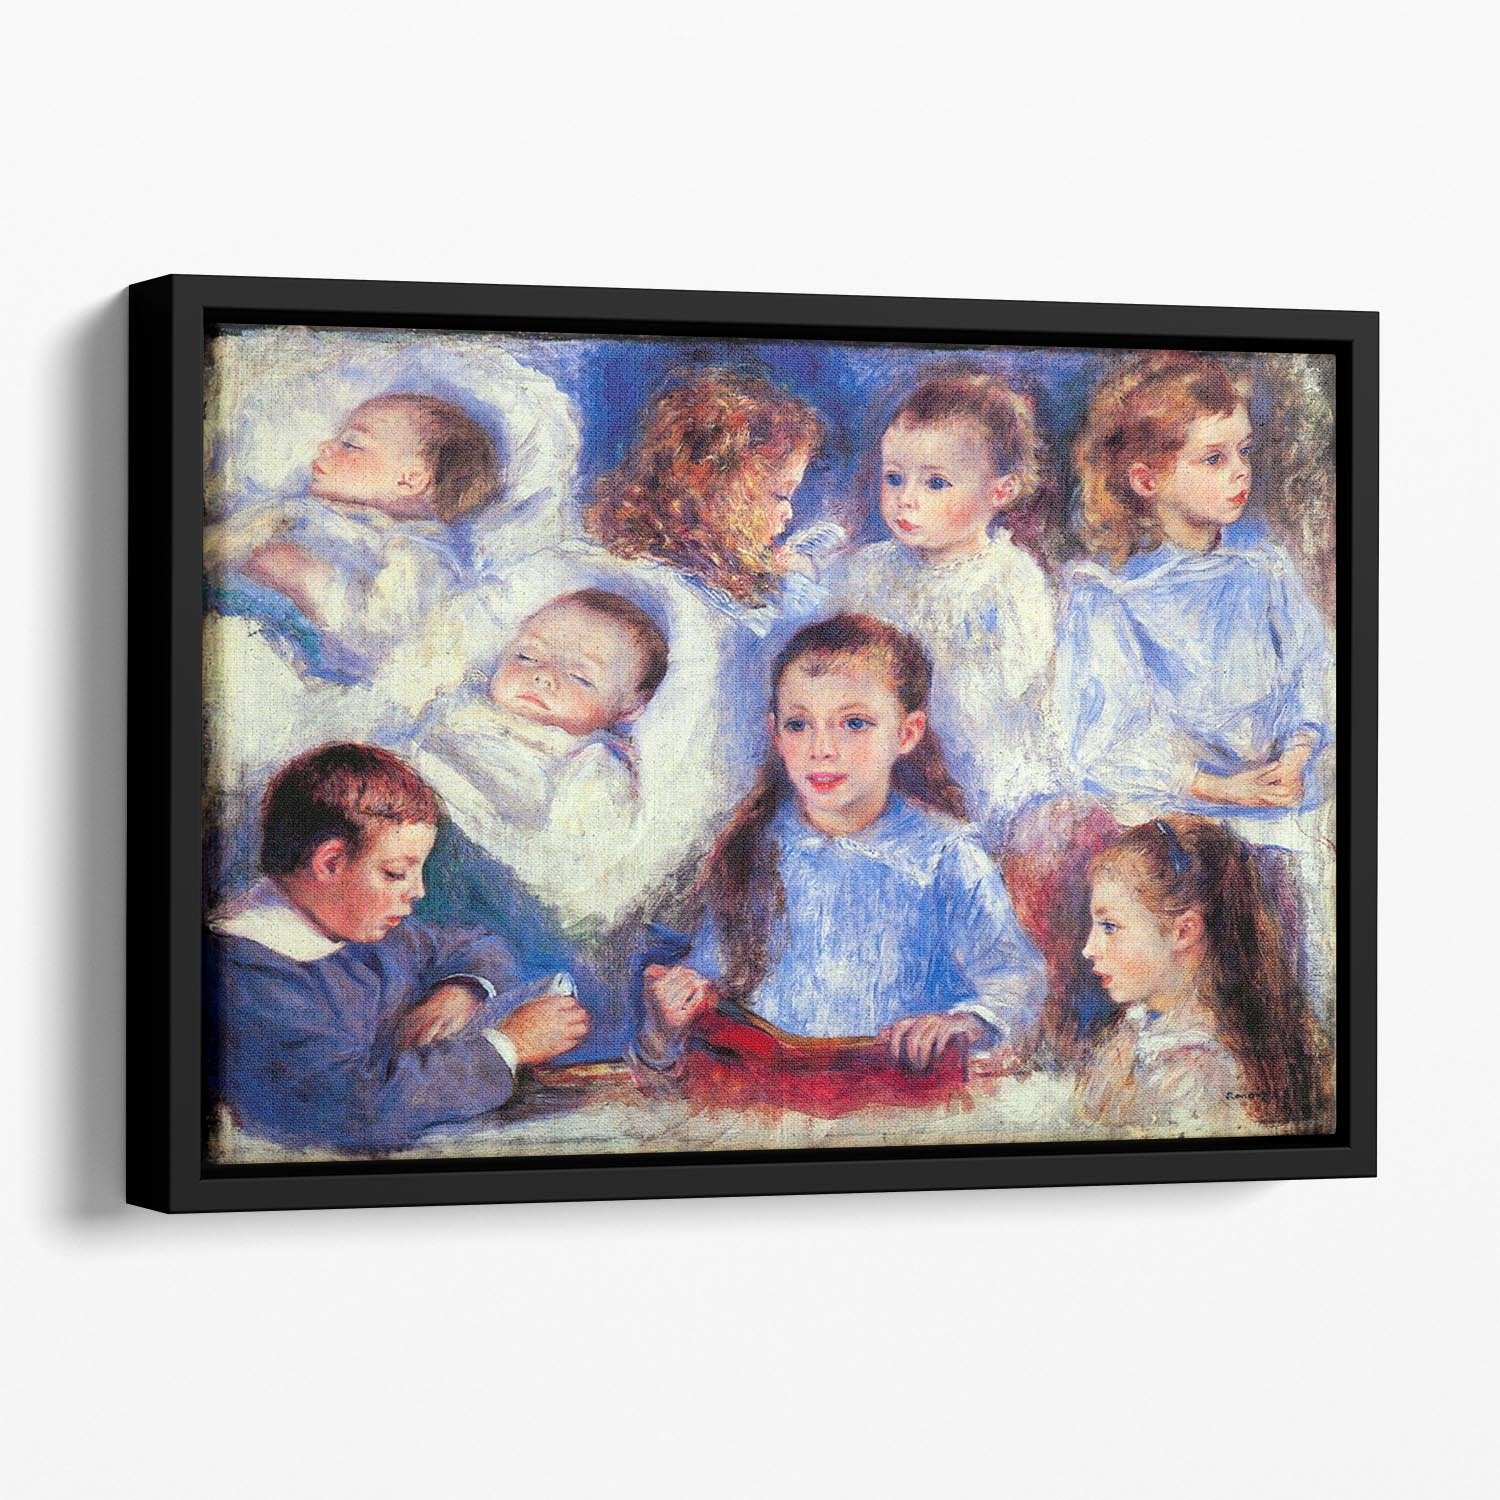 Images of childrens character heads by Renoir Floating Framed Canvas